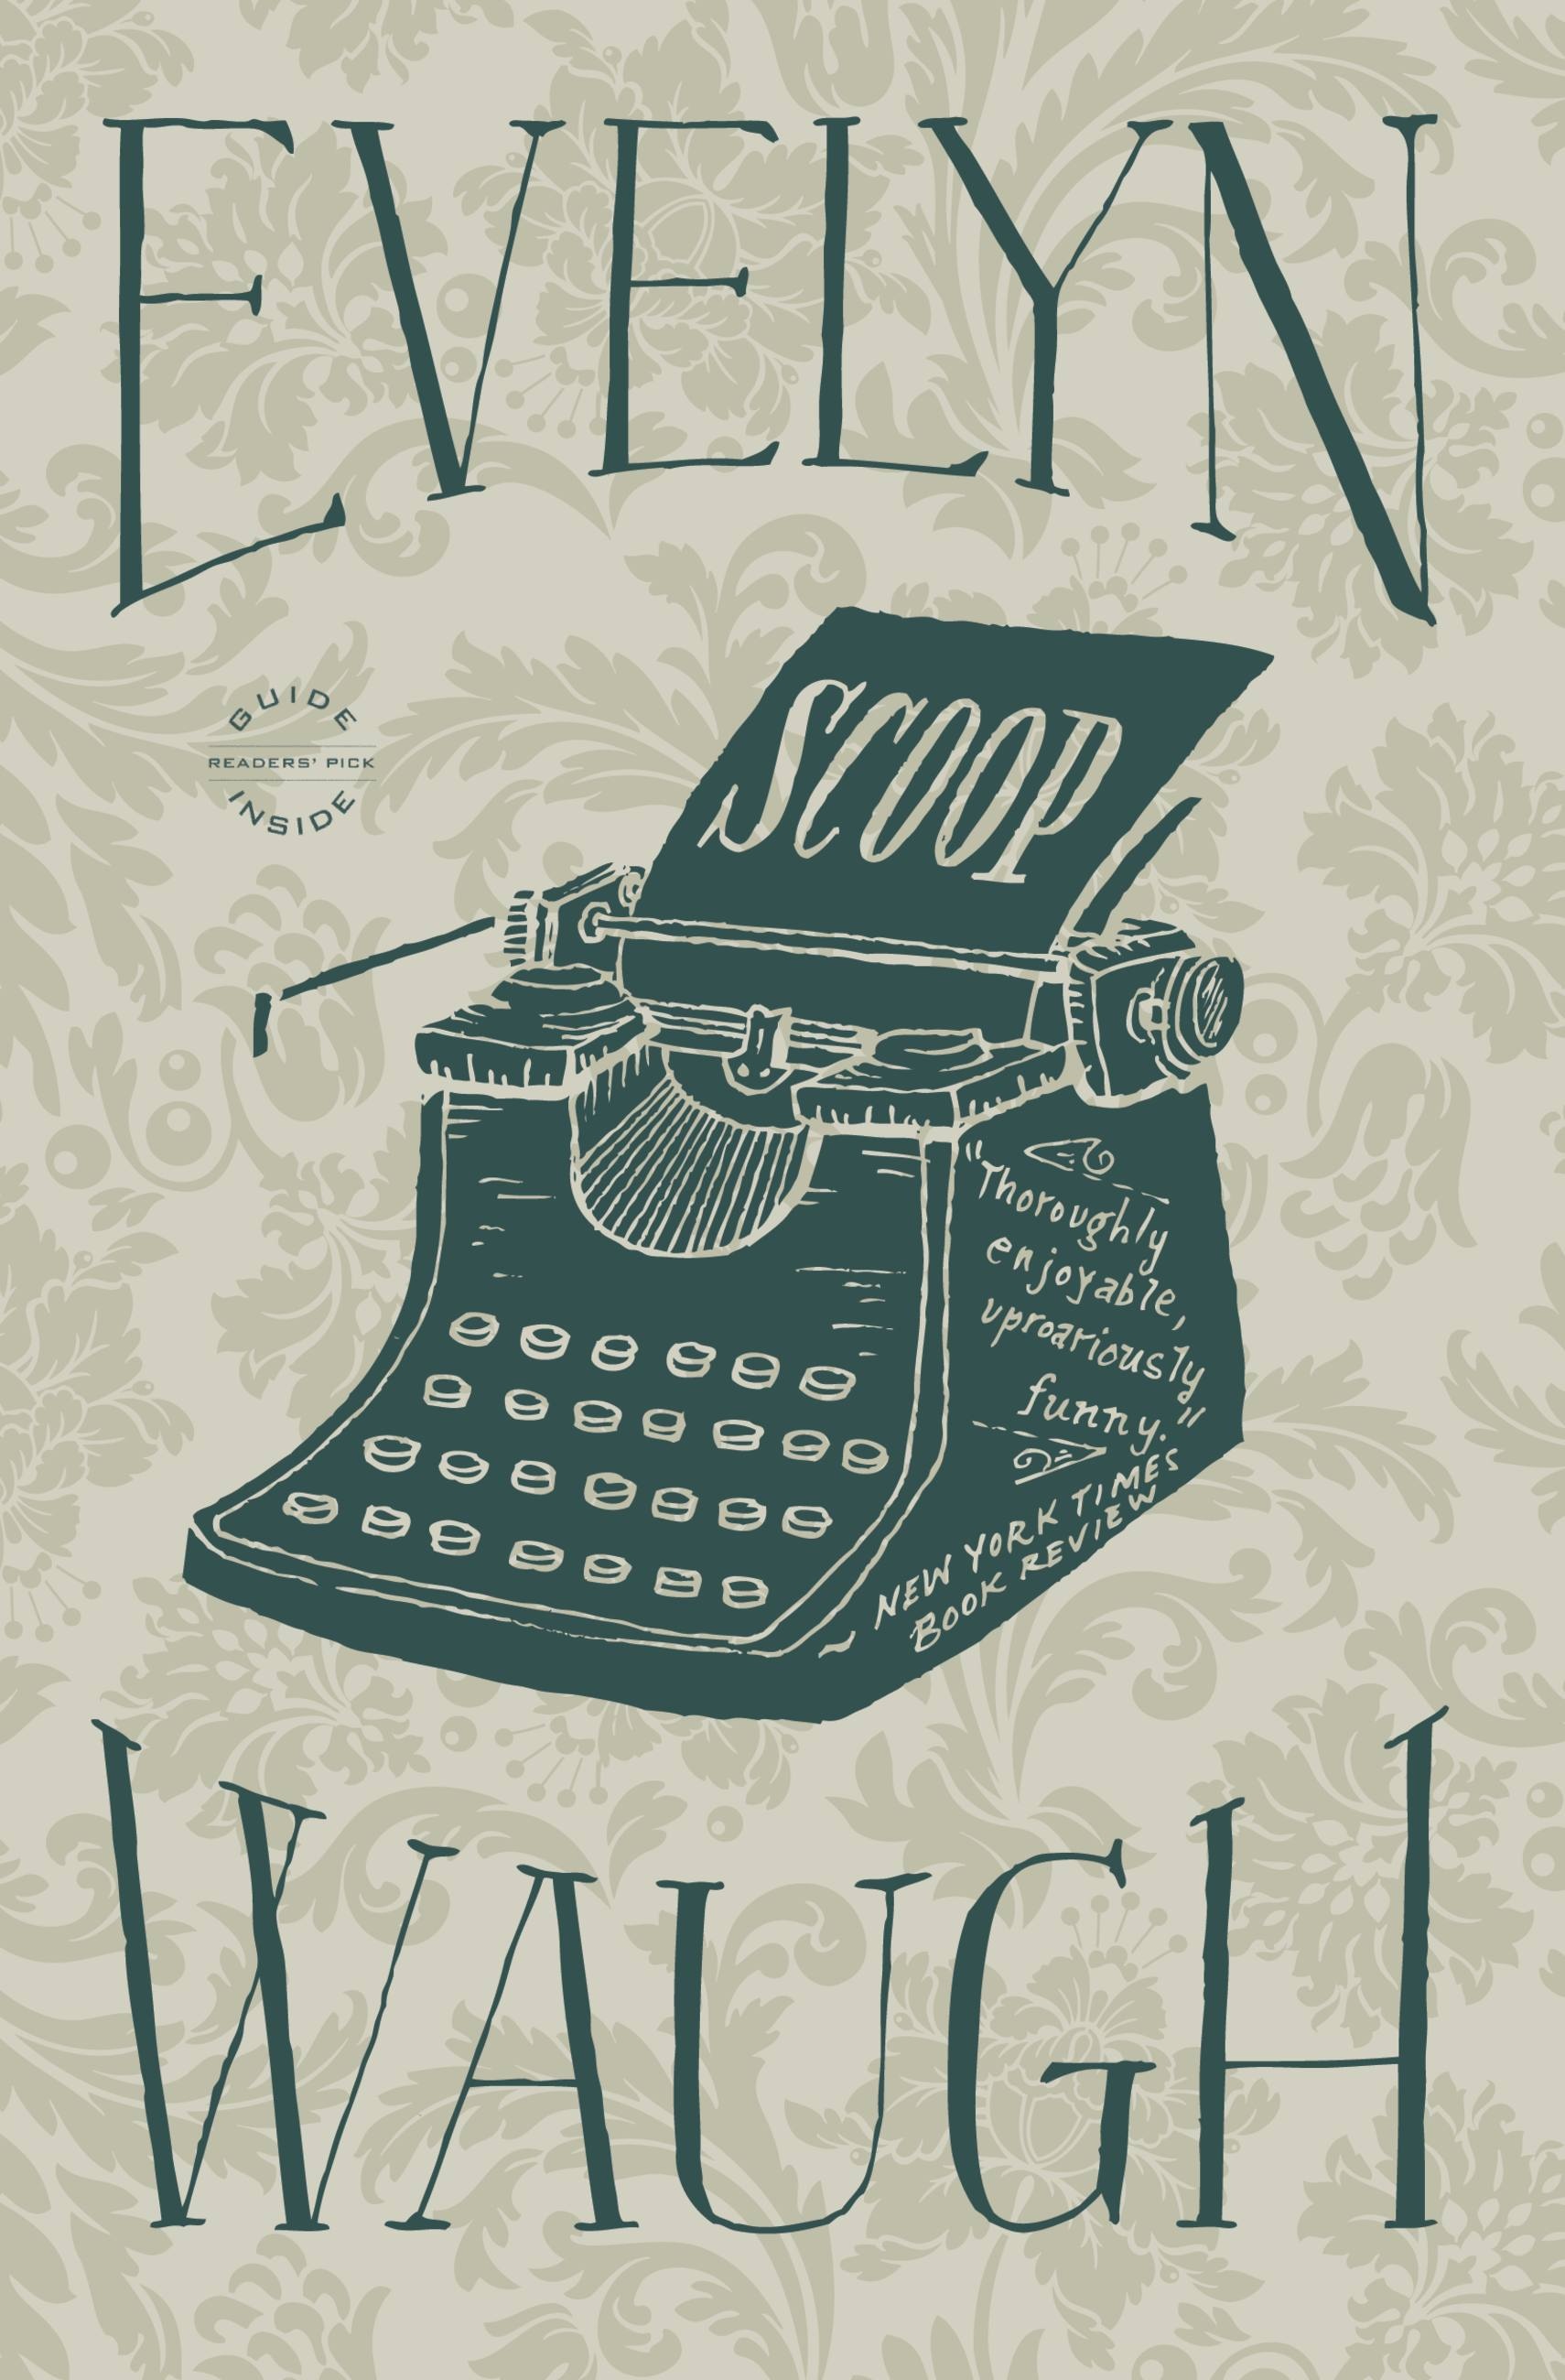 scoop evelyn waugh review